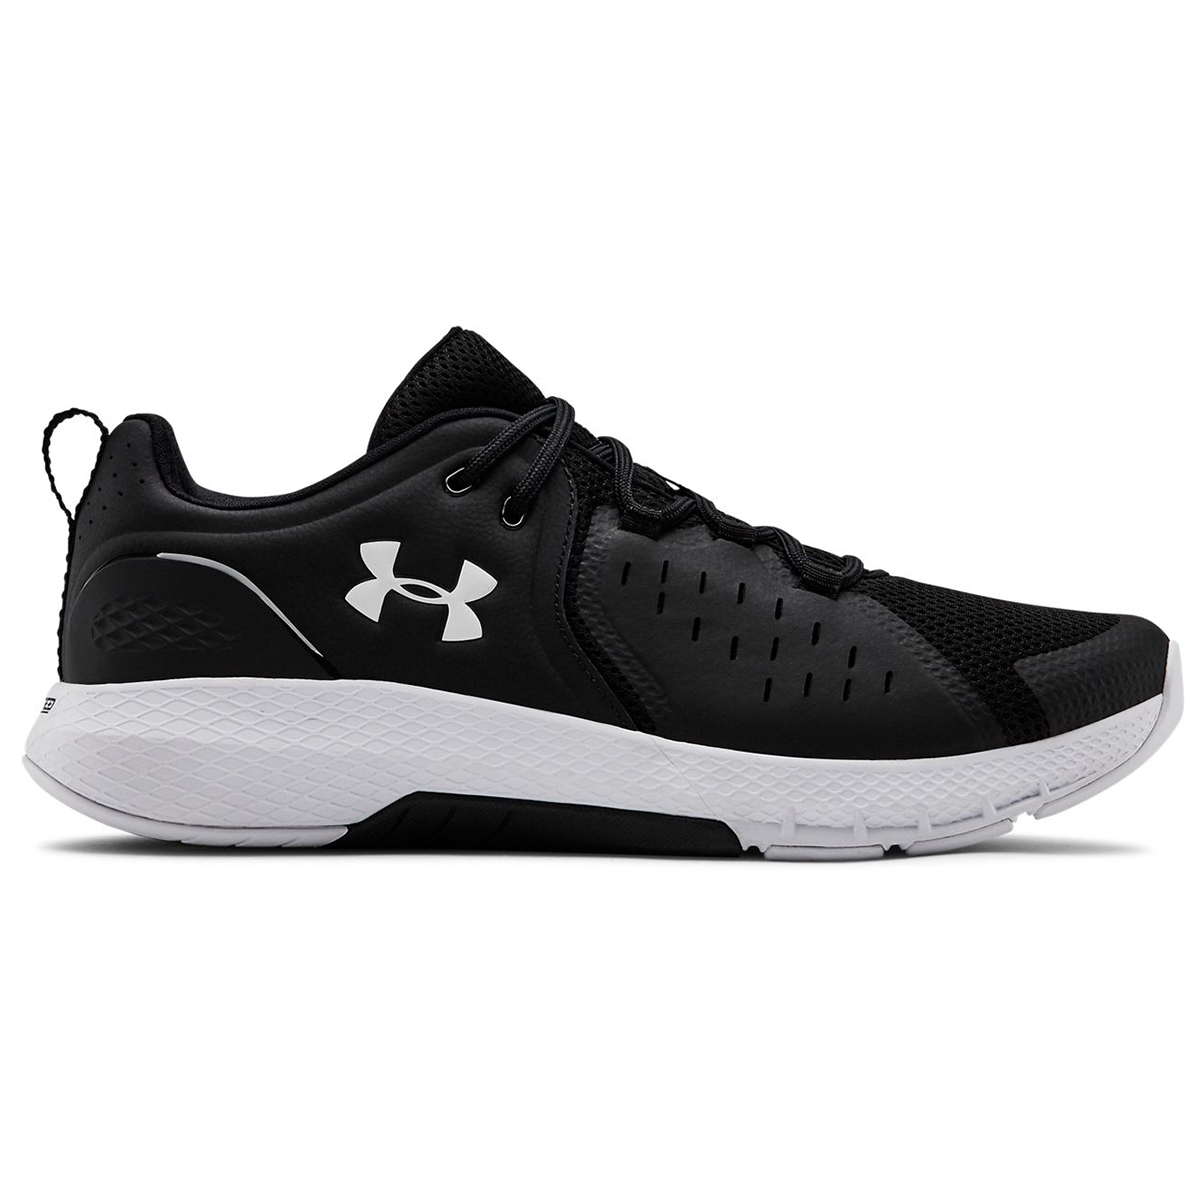 Under Armour Men's Charge Commit Running Shoes - Black, 13